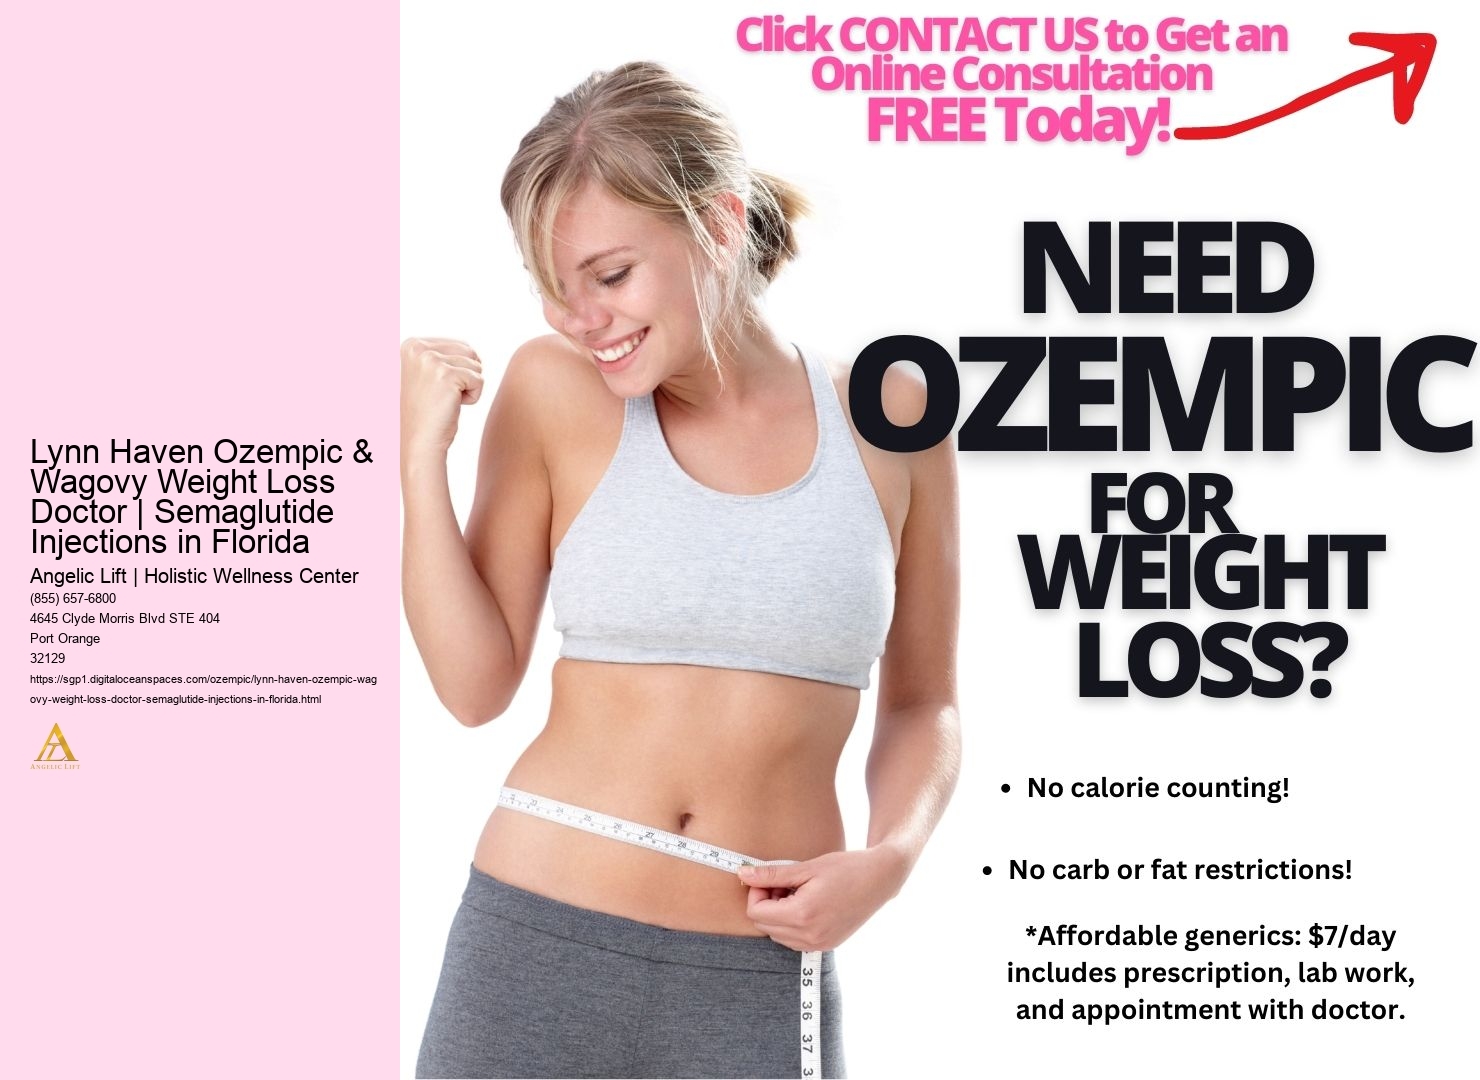 Lynn Haven Ozempic & Wagovy Weight Loss Doctor | Semaglutide Injections in Florida